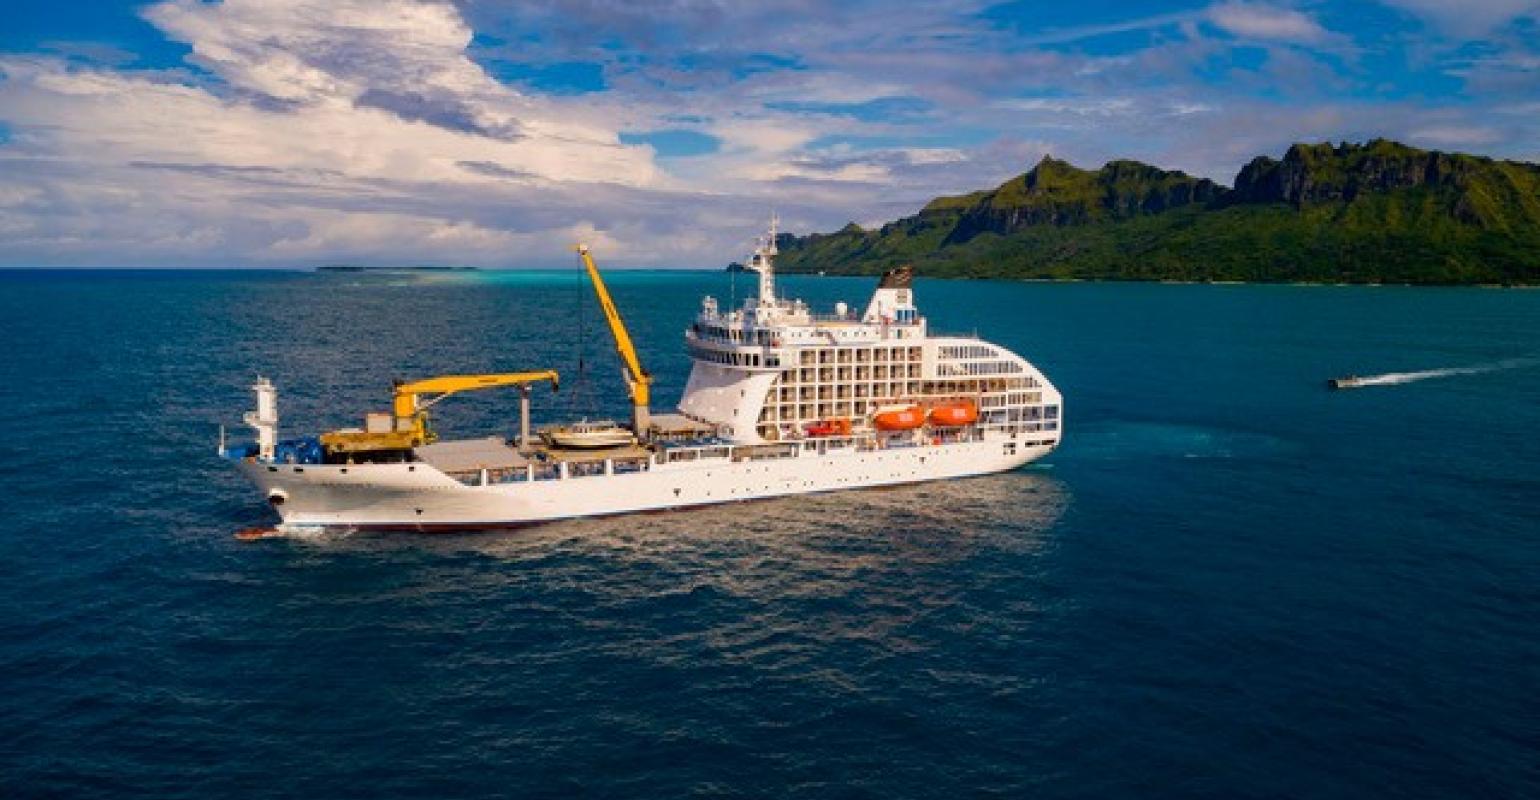 Aranui 5 to operate first fiveday French Polynesia cruise in 2023